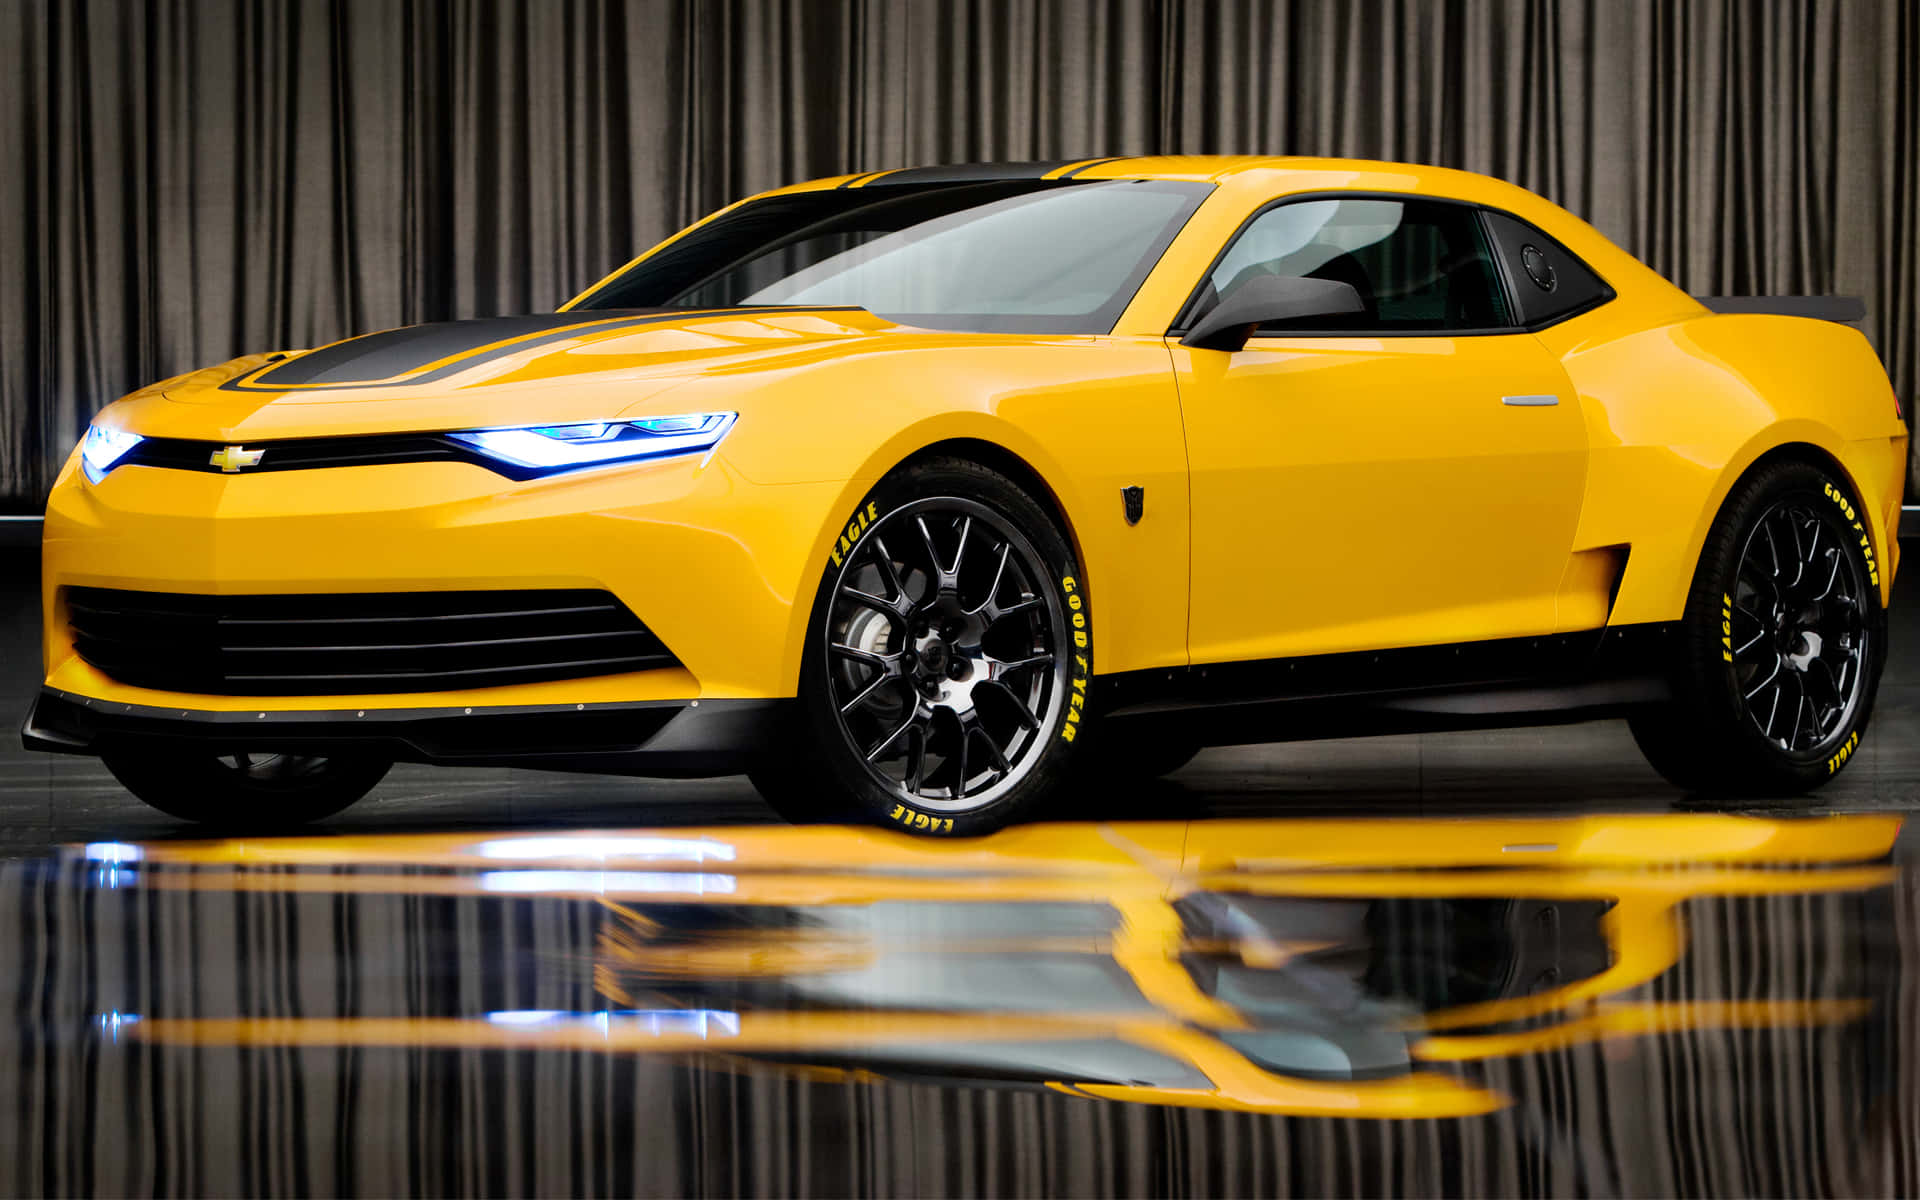 Transformers Bumblebee As A Chevrolet Camaro Background